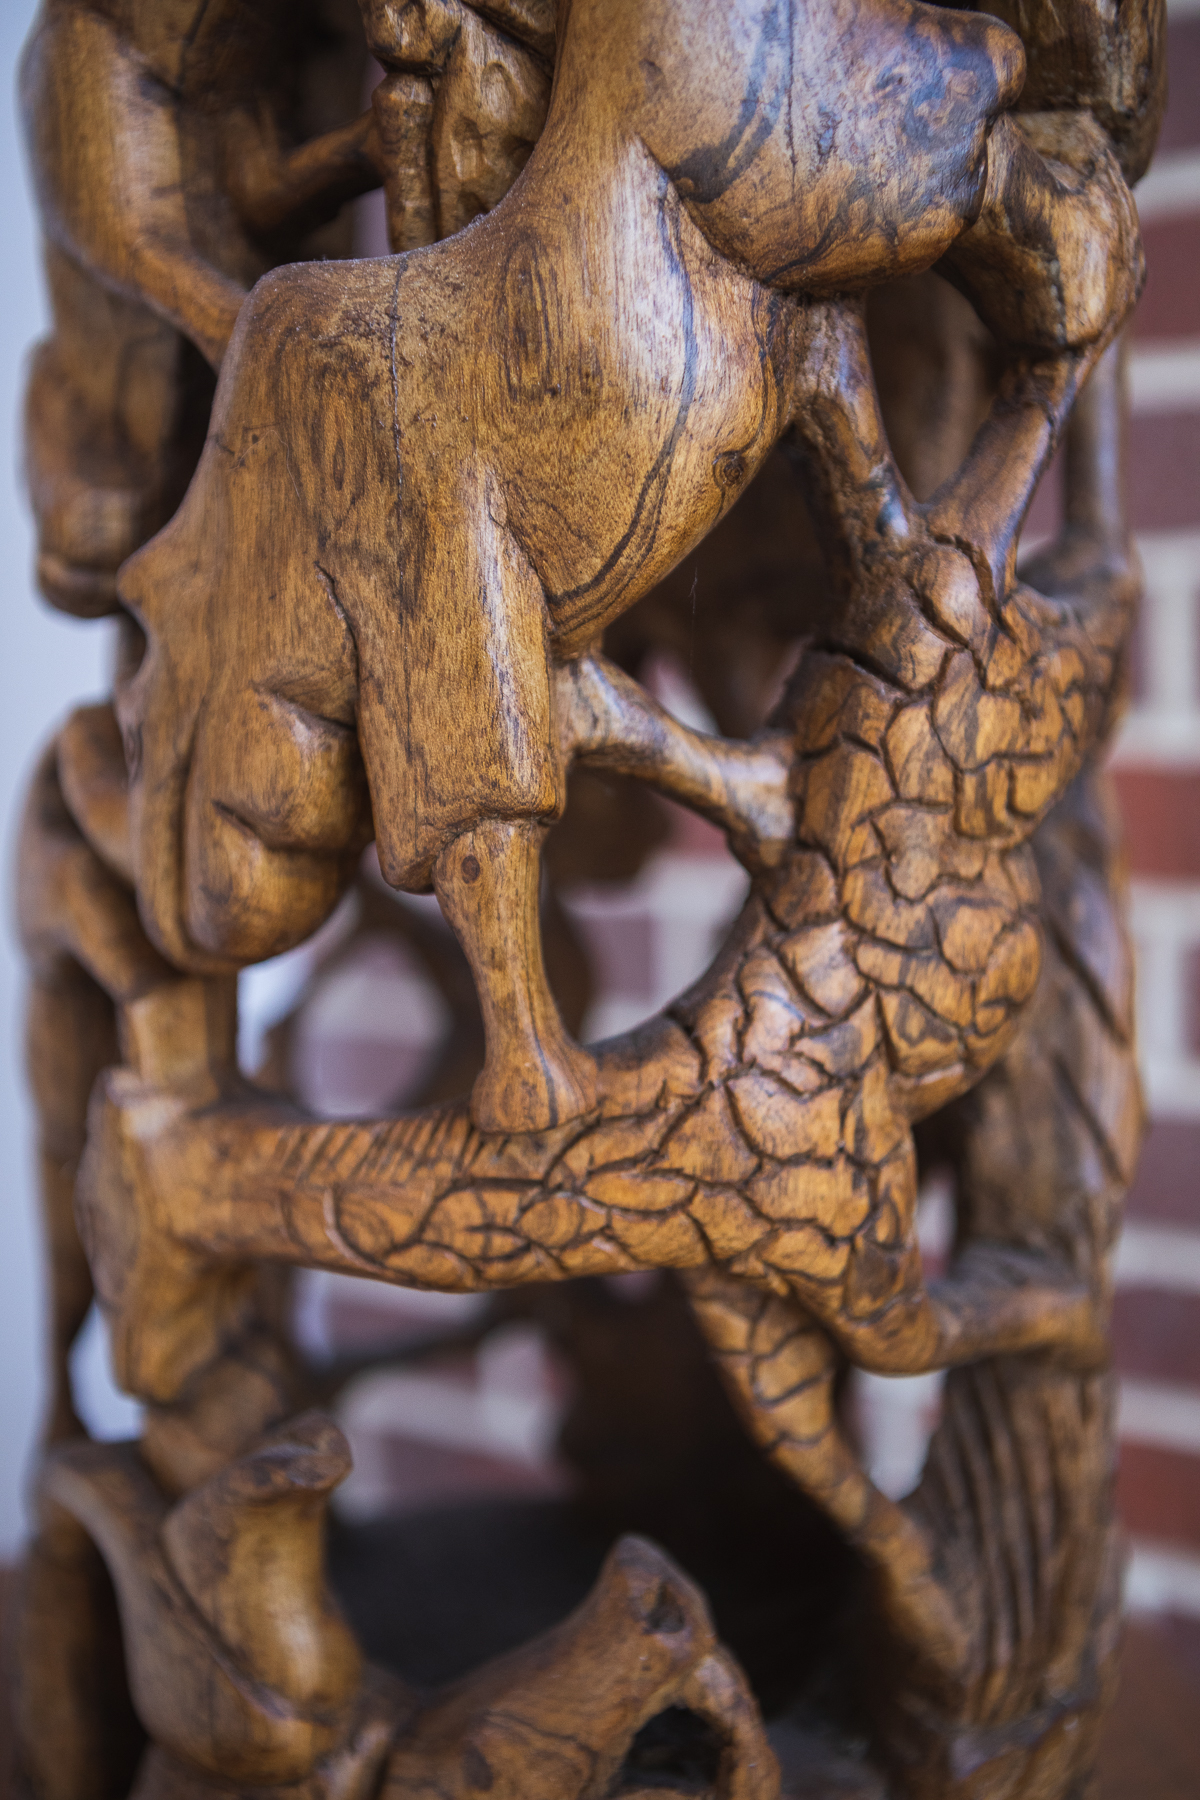 A sculpture of what looks like wooden animals, possibly a rhino, possibly a giraffe. In the background, there is red brick.